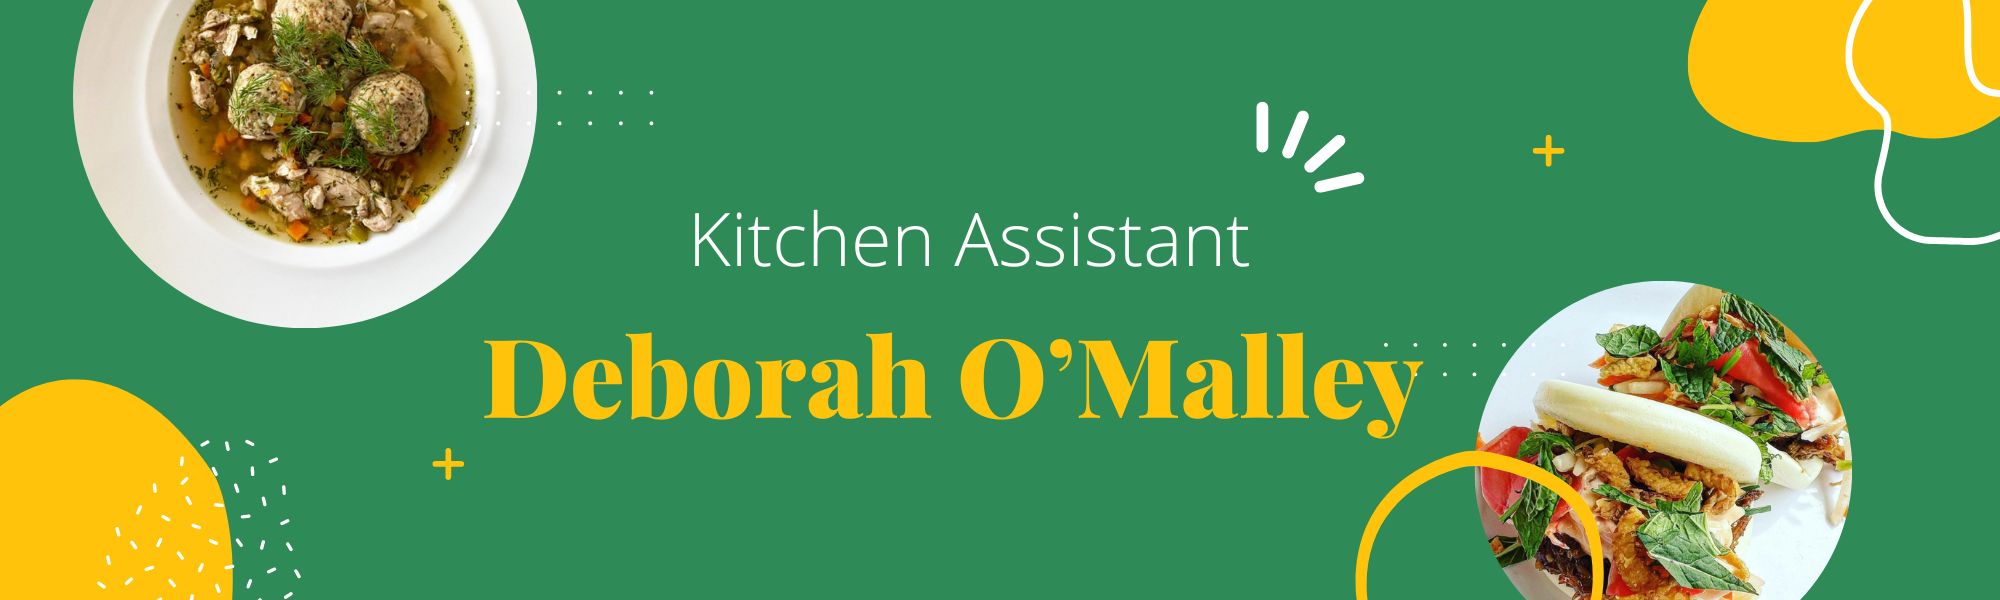 NEW%3A+Learn+about+Kitchen+Assistant+Deborah+OMalley%2C+who+has+24+years+of+experience+here.+Discover+her+favorite+part+of+the+job+and+what+brings+her+joy.